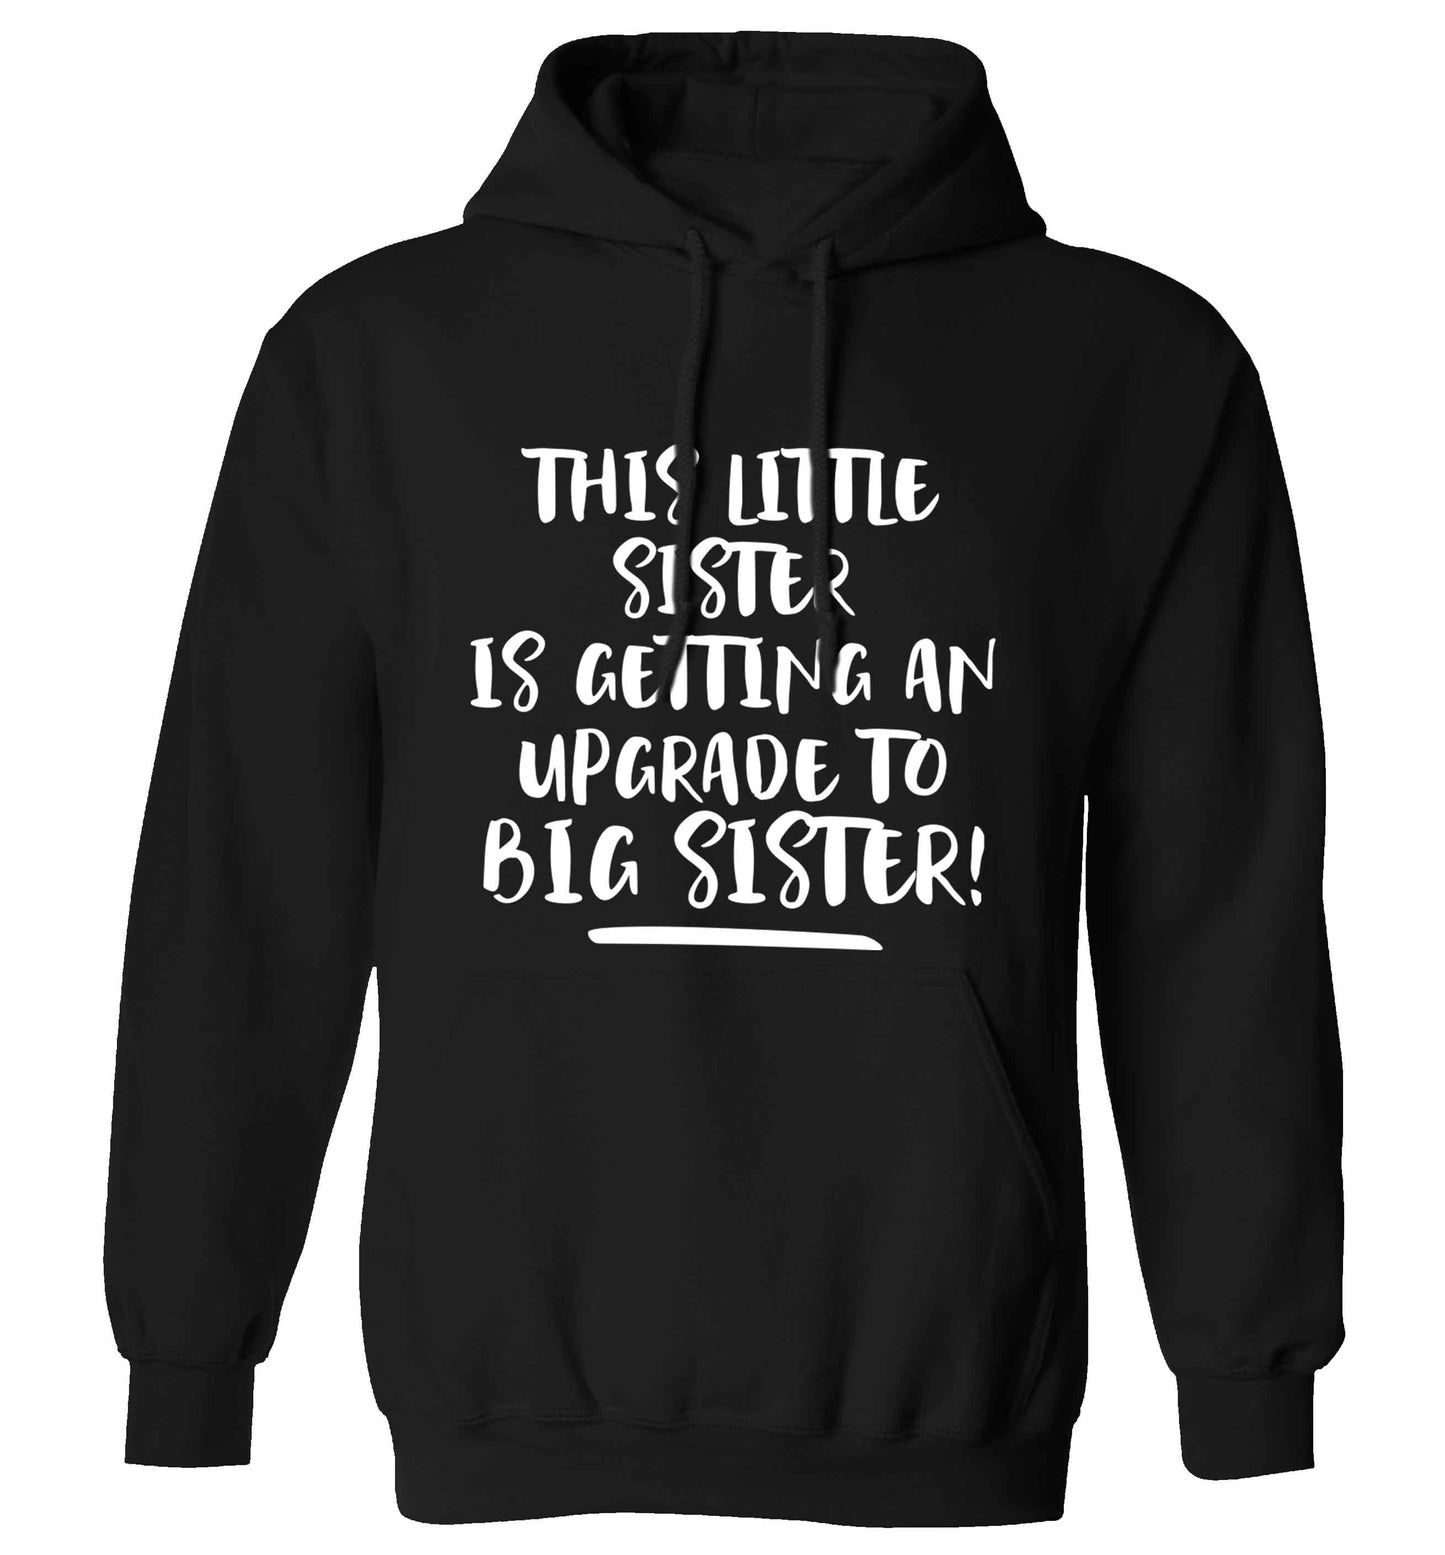 This little sister is getting an upgrade to big sister! adults unisex black hoodie 2XL